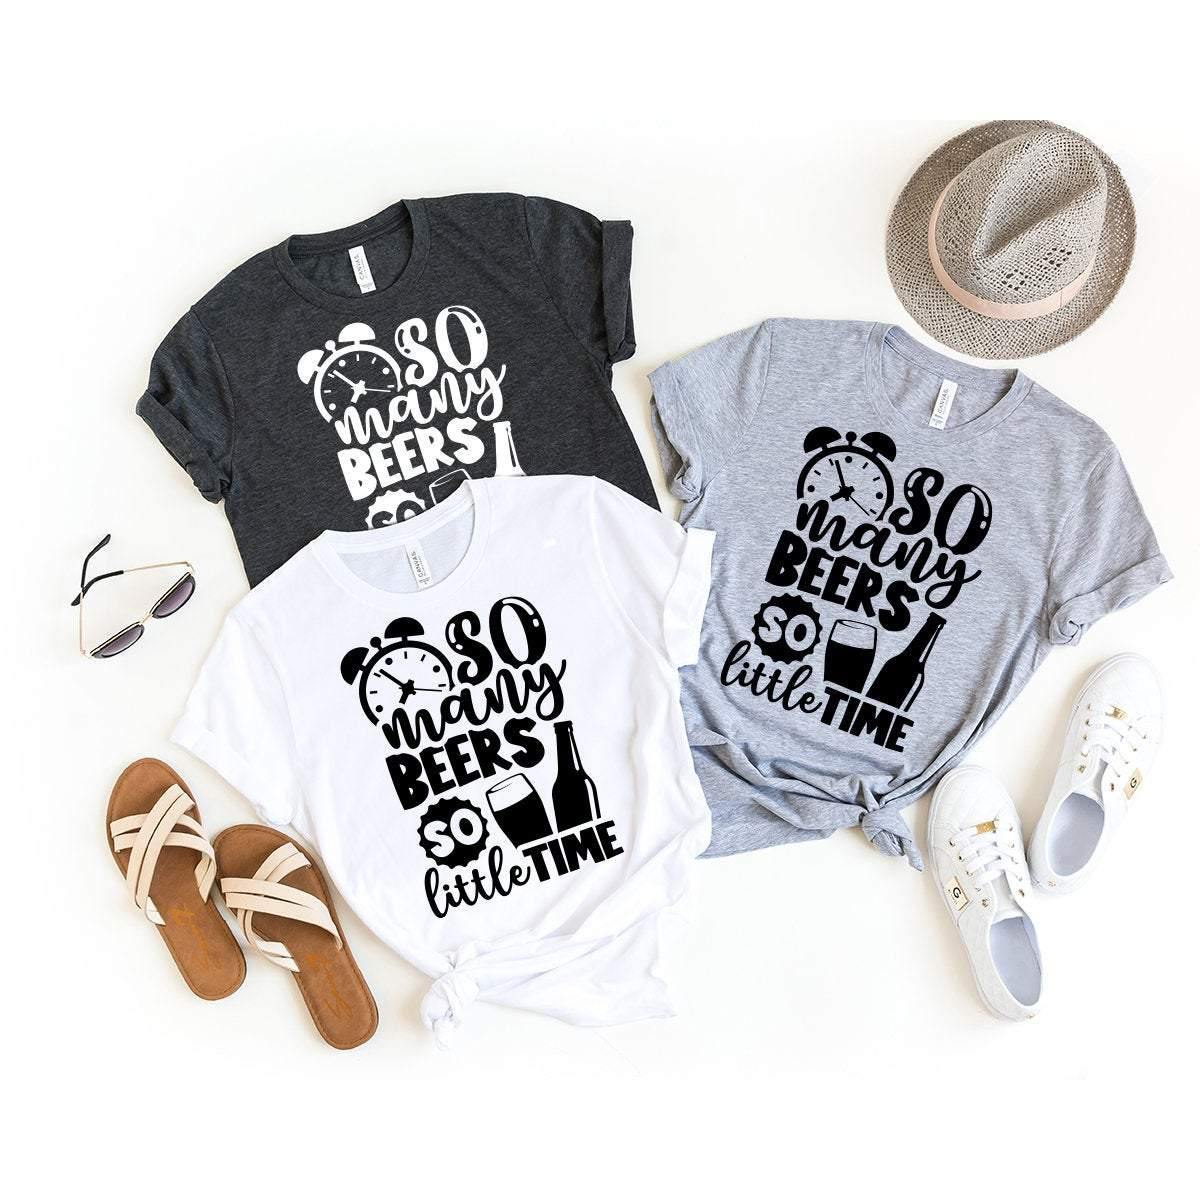 Beer Fanatic T-Shirt, Beer Lover Gift, Funny Drinking Shirt, So Many Beers So Little Time Shirt, Beer Party Tshirt, Alcoholic Shirt - Fastdeliverytees.com